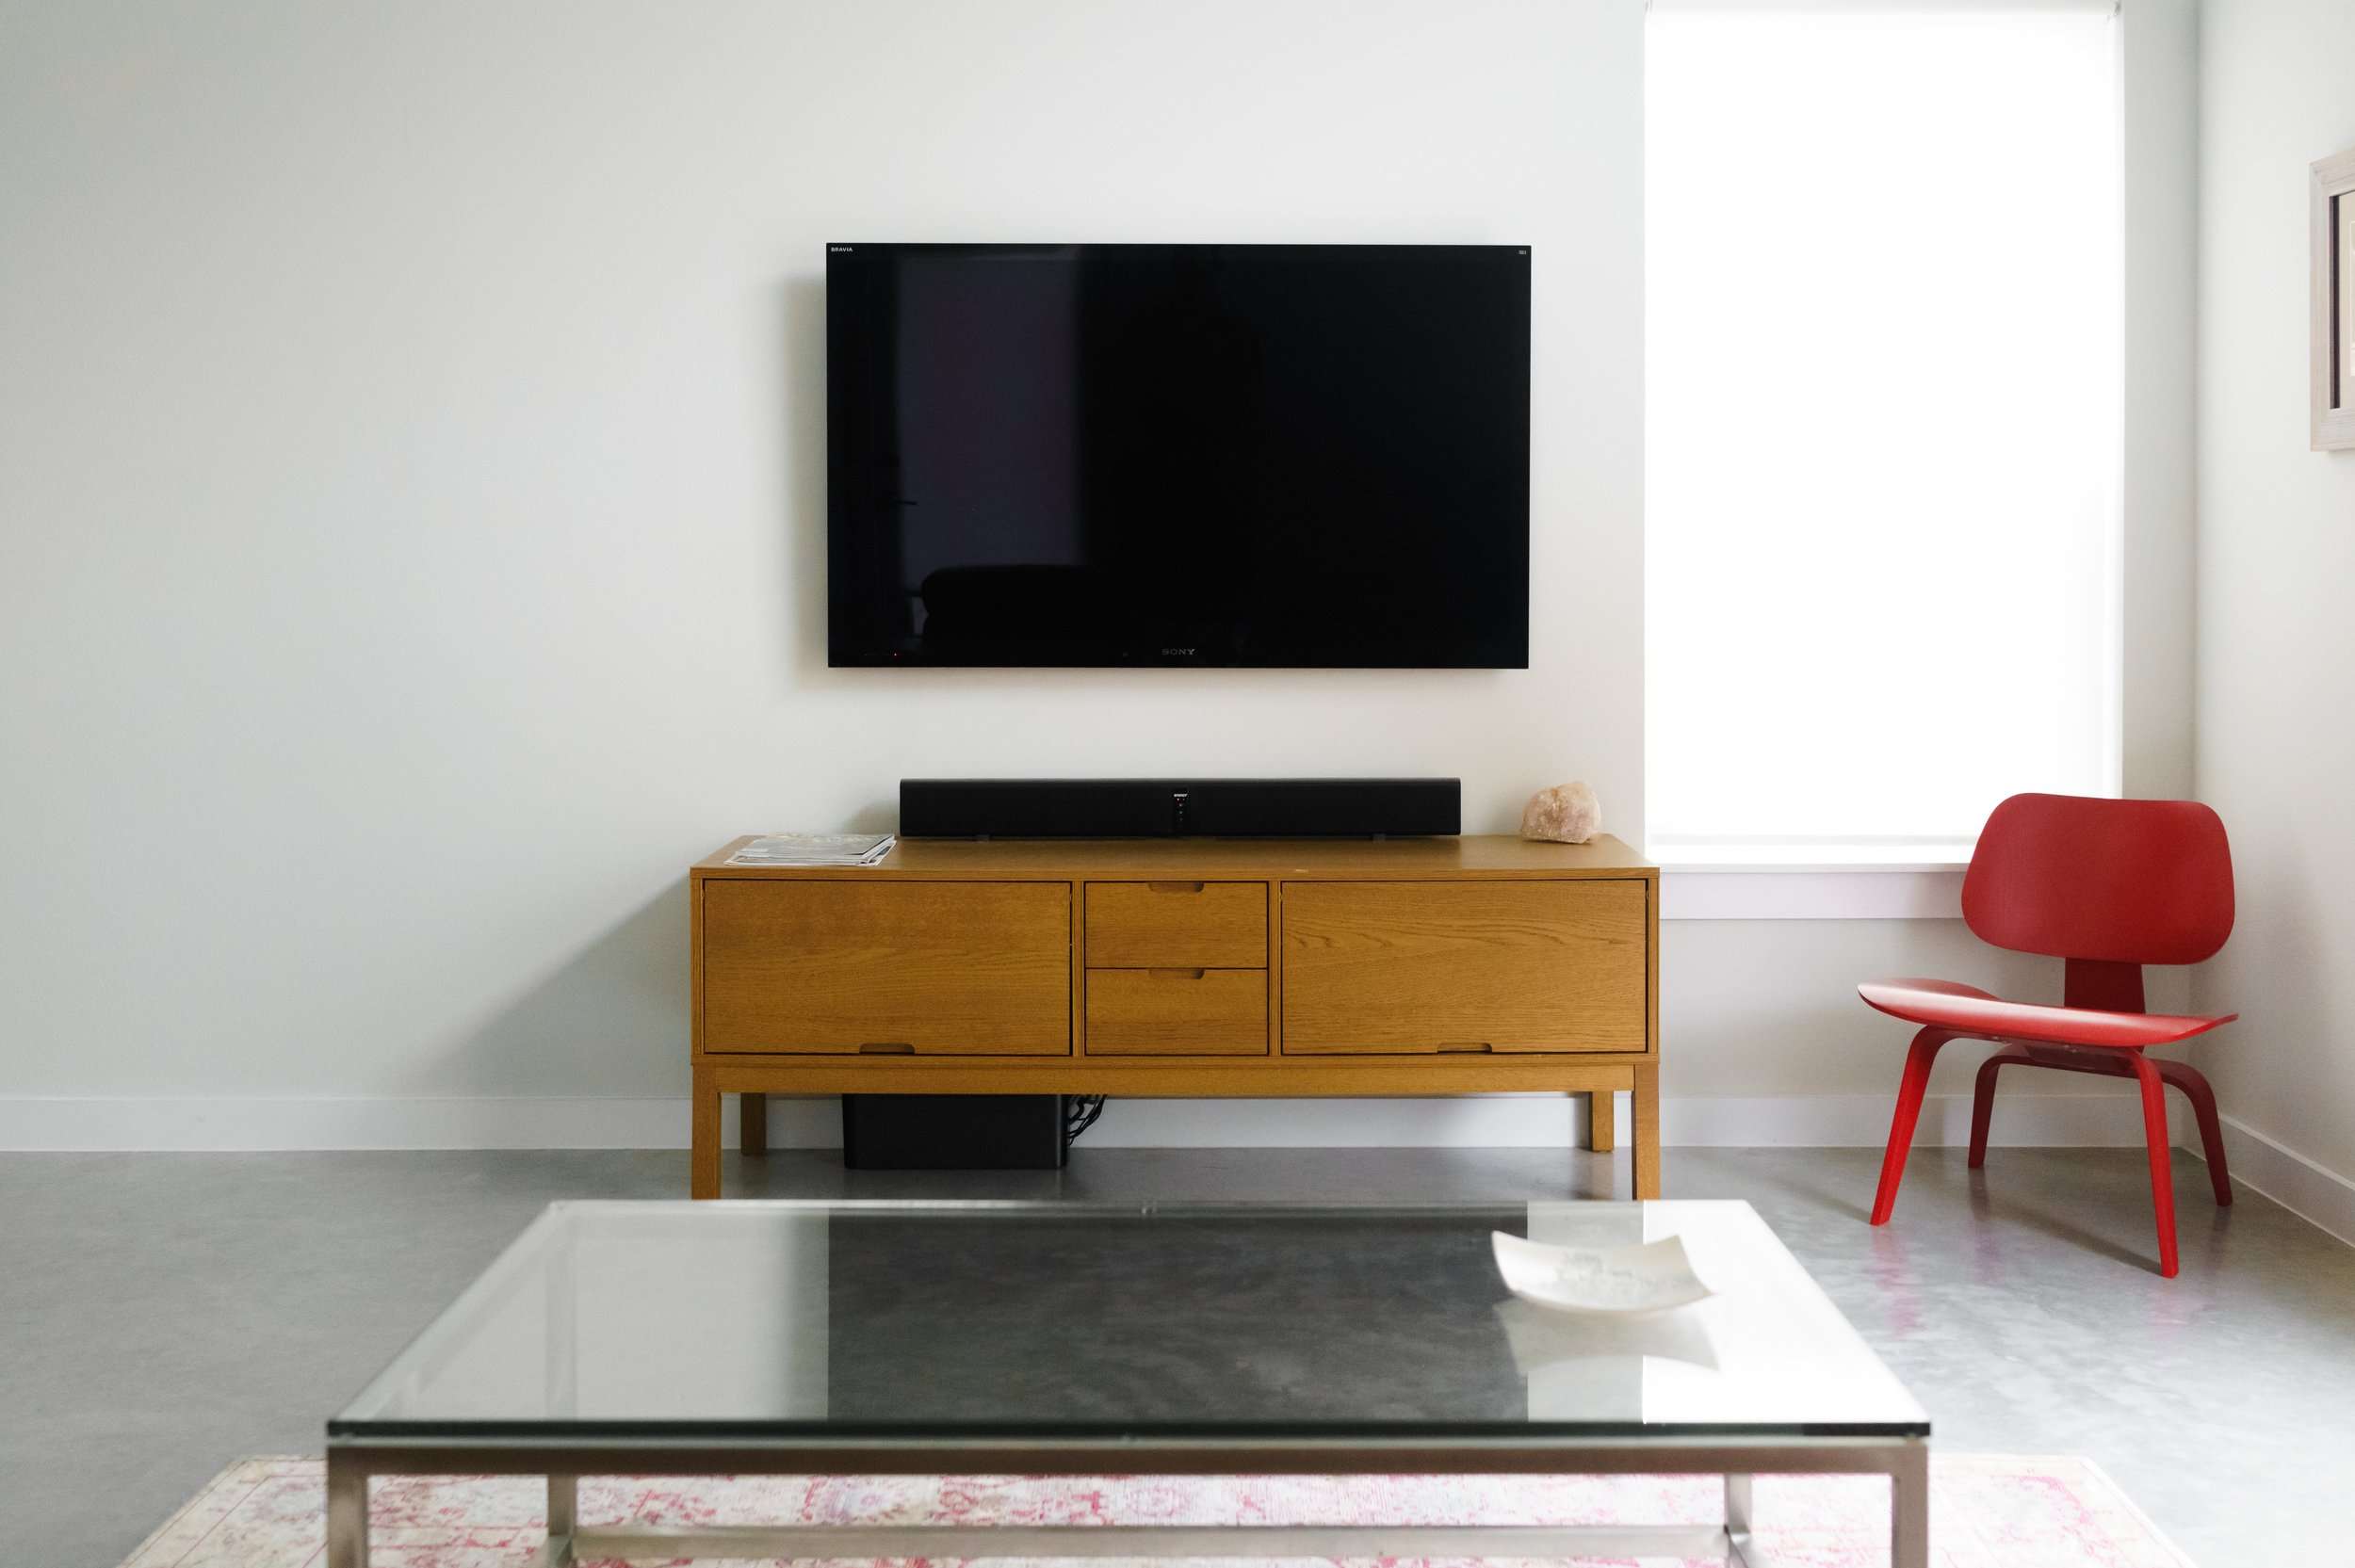 The Homeownerâs Guide to the Best TV Wall Mounts